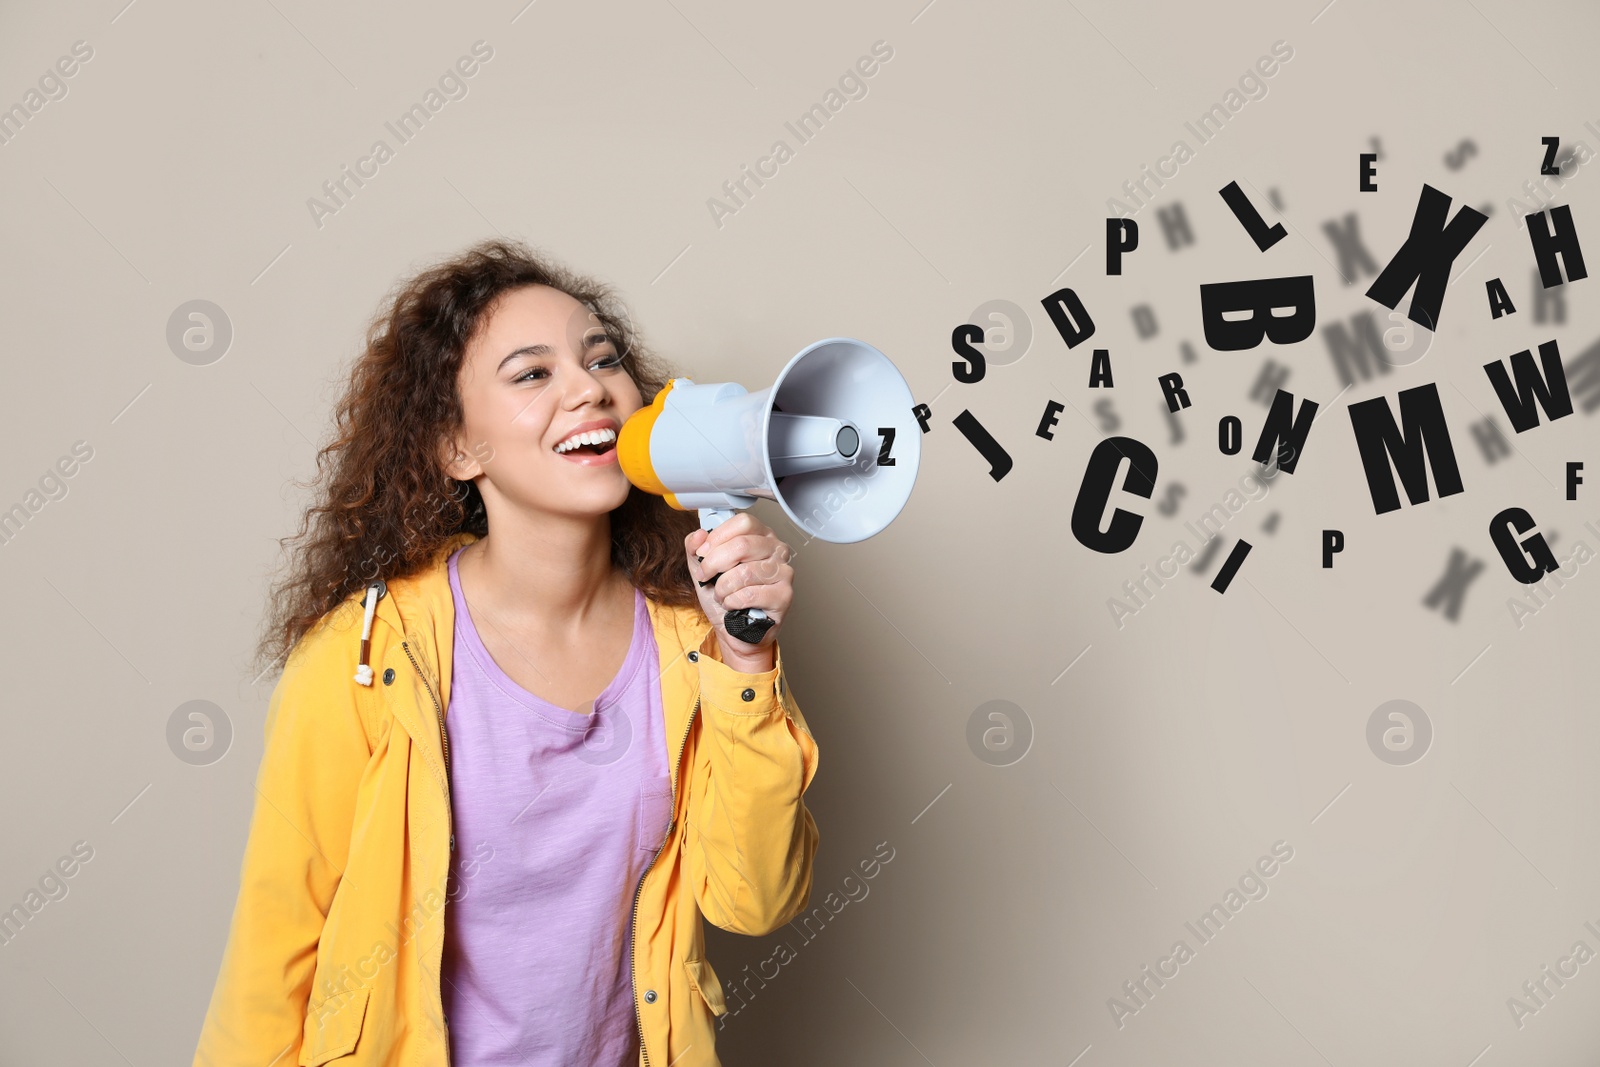 Image of Young African-American woman with megaphone and letters on light background. Speech therapy concept